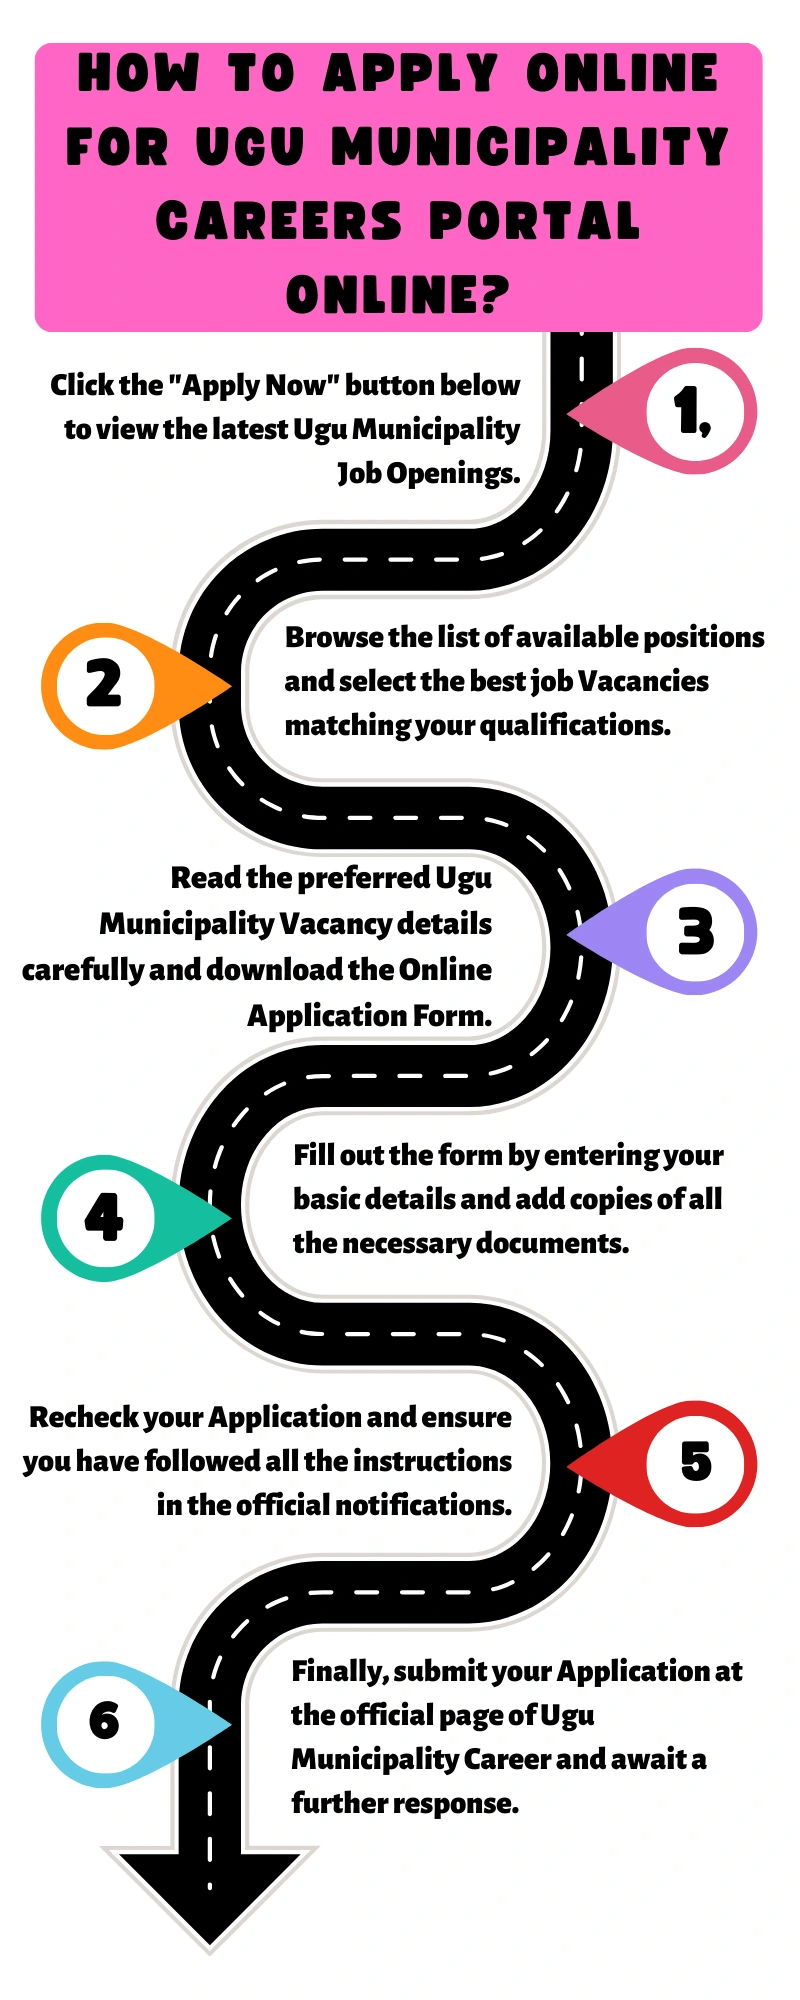 How to Apply online for Ugu Municipality Careers Portal Online?